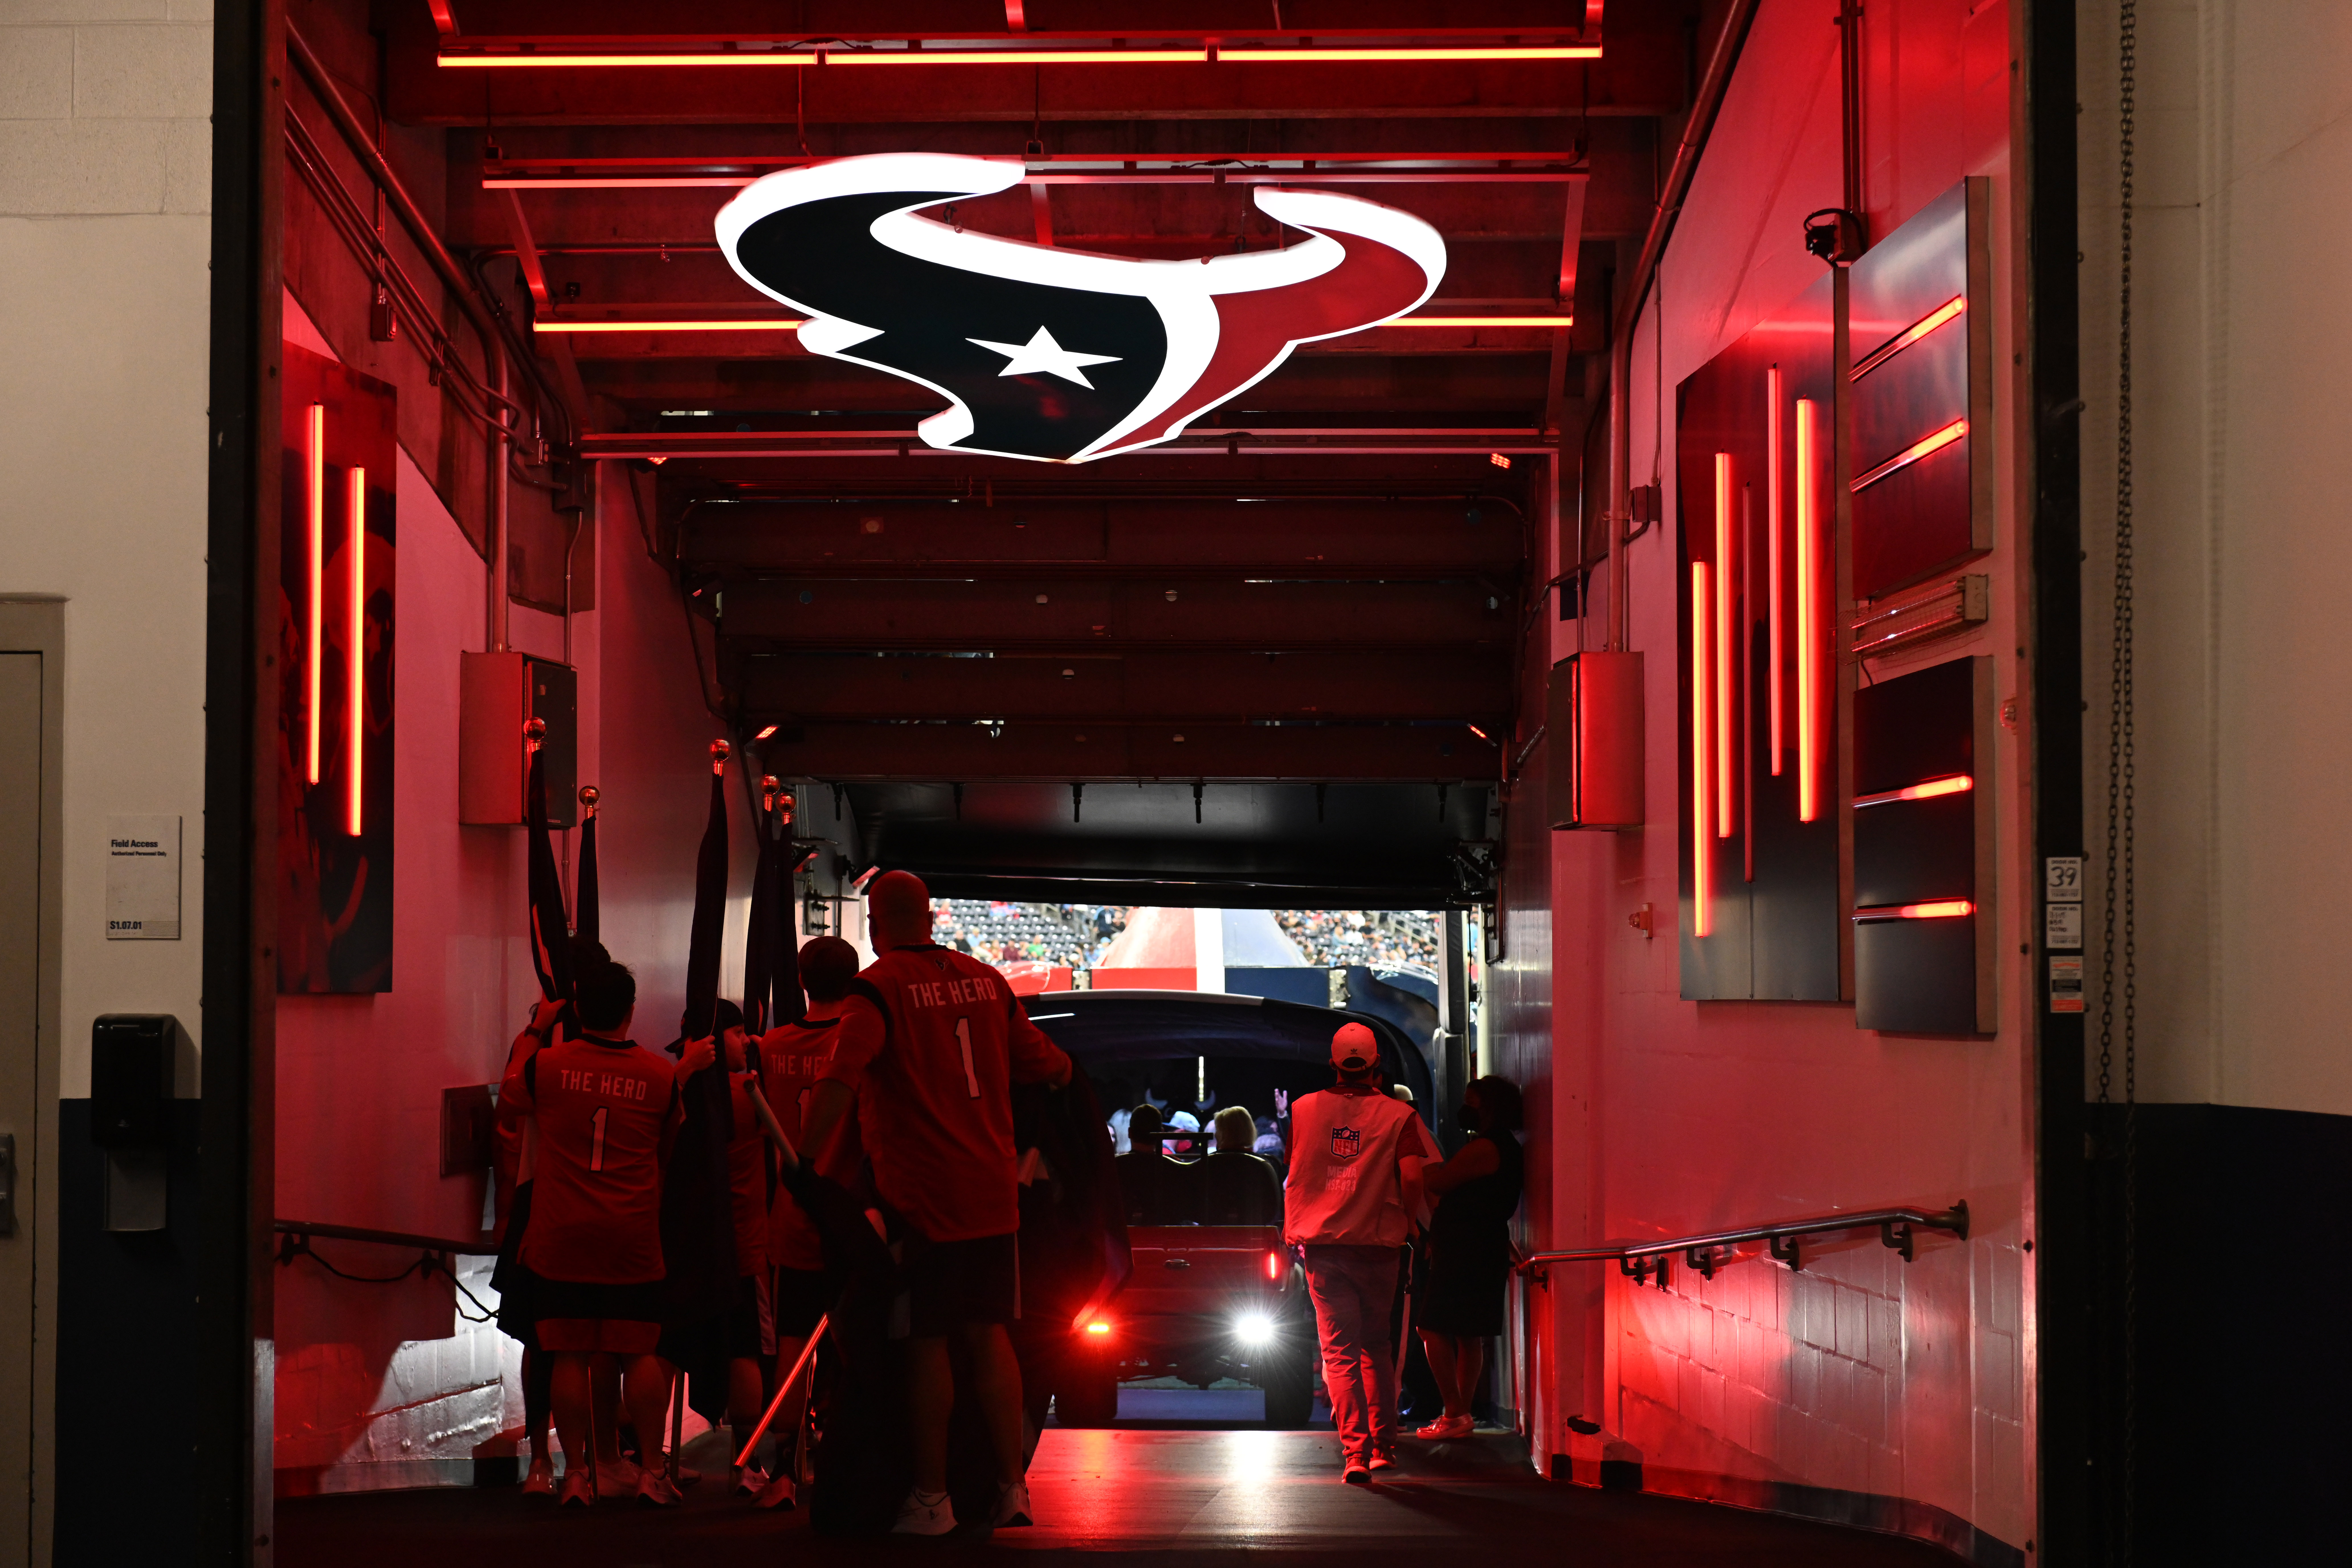 “The Herd” gets ready to lead out the team from the tunnel prior to start of game featuring the Houston Texans and the Tennessee Titans on January 9, 2022 at NRG Stadium in Houston, TX.